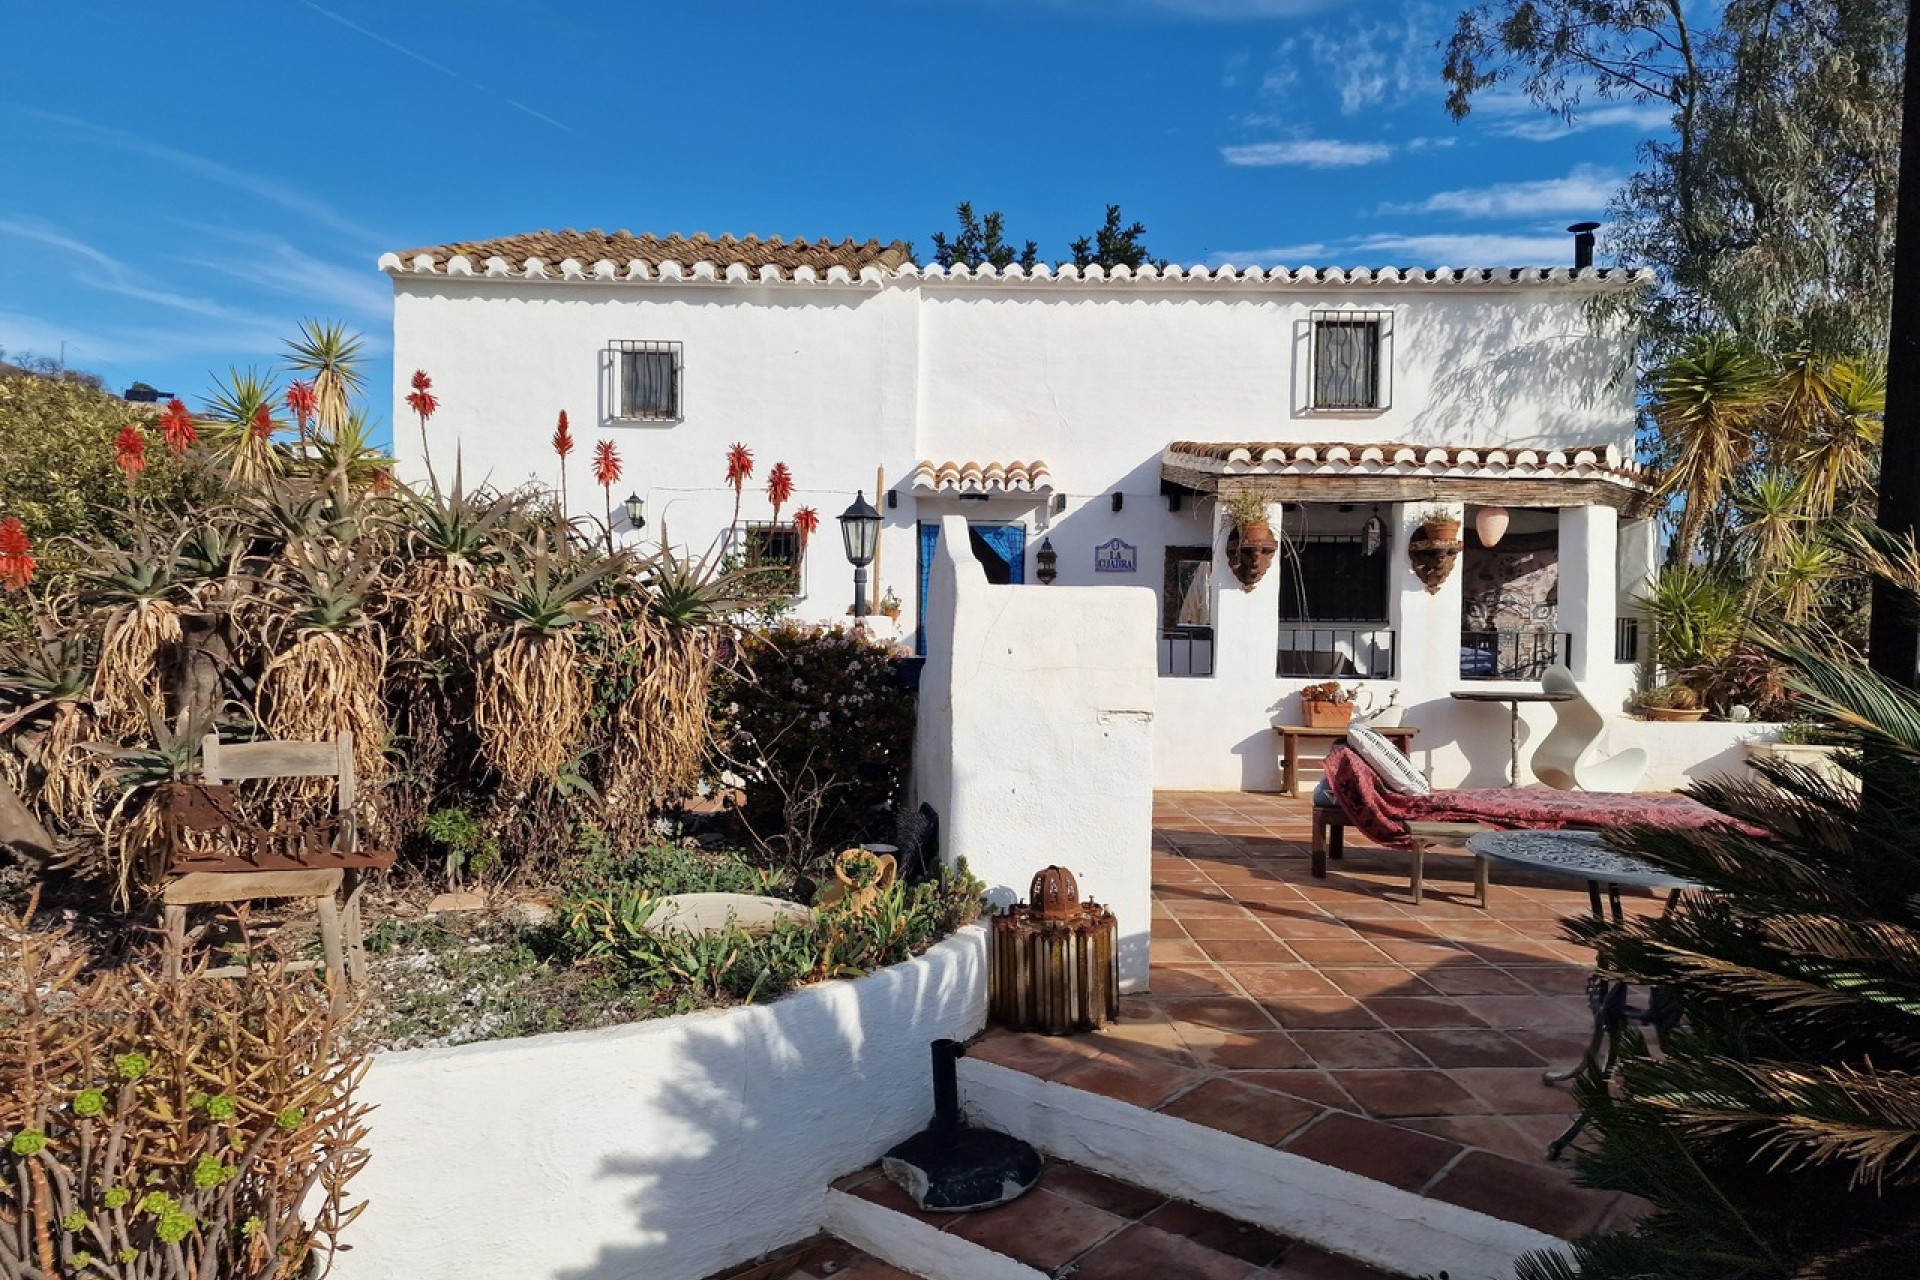 Reventa - Town house -
Comares - Inland